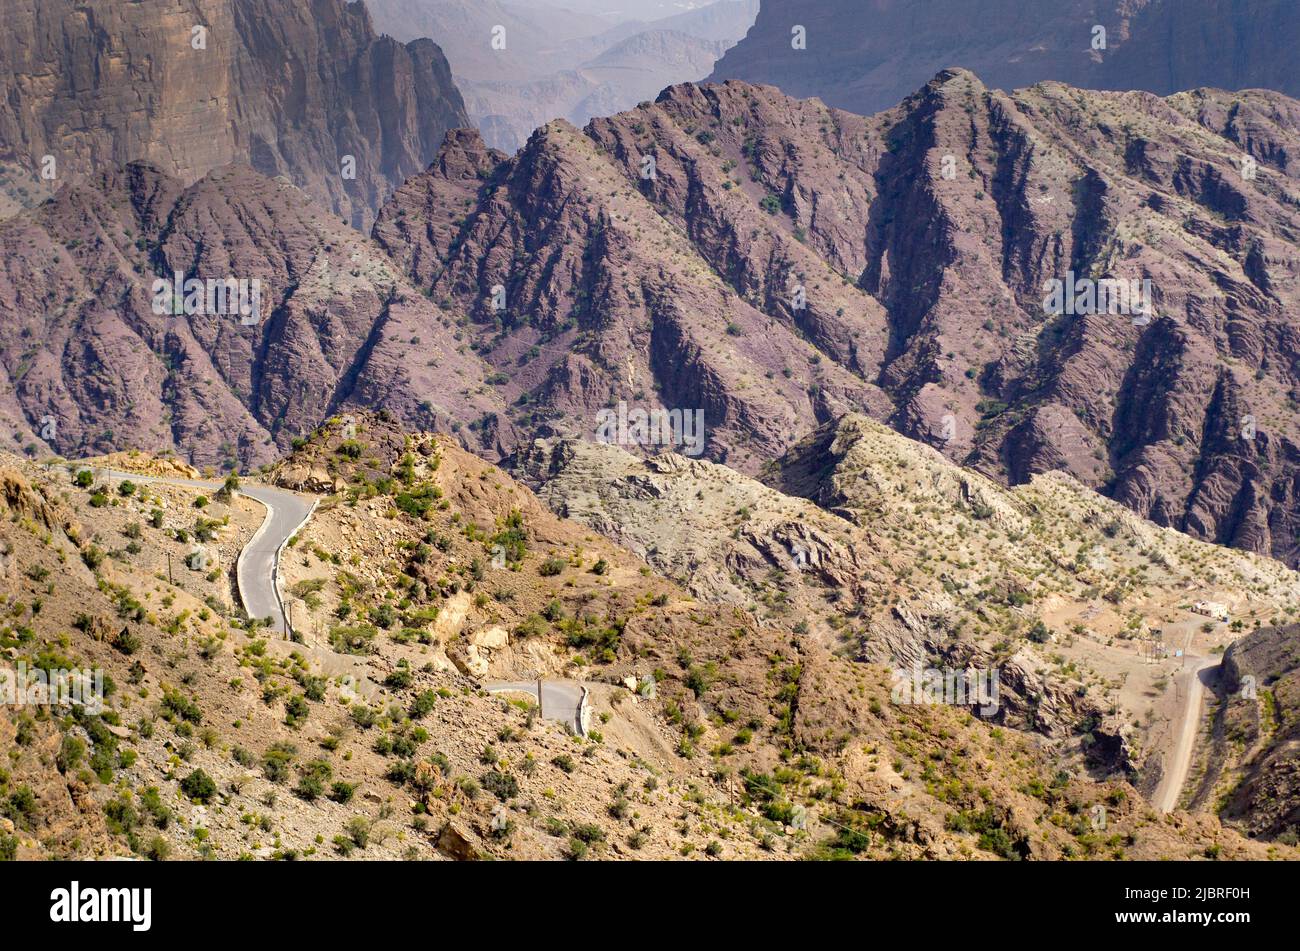 Dramatic Omani mountains called Jebel Akhdar of the Hajar mountain range, the harsh interior of Oman, home of traditional rose harvesting and fruit fa Stock Photo